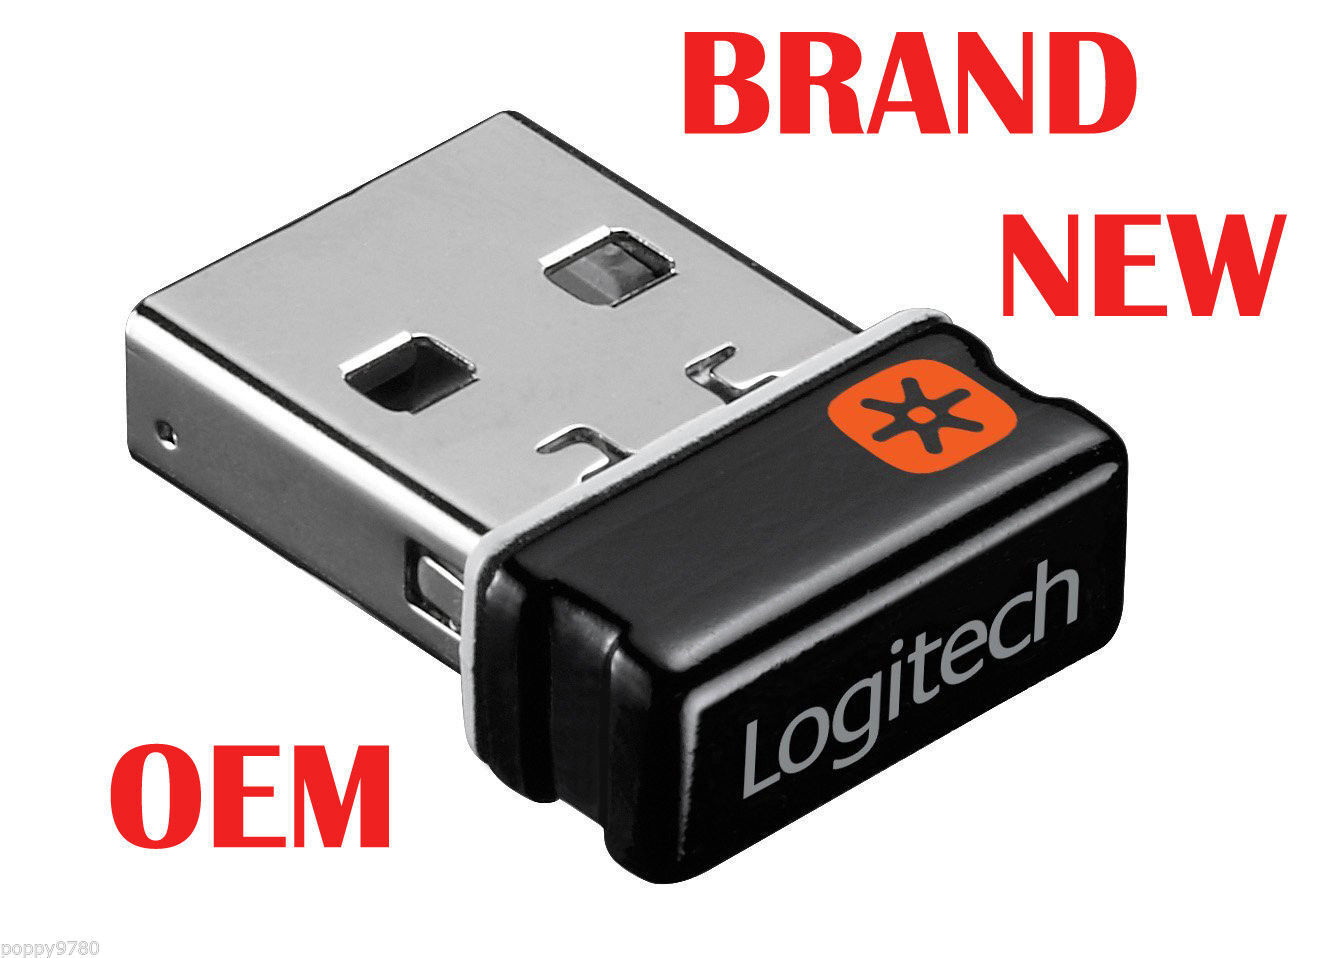 Logitech Unifying Receiver Wireless USB Dongle PC Mouse keyboard 993-000439 OEM